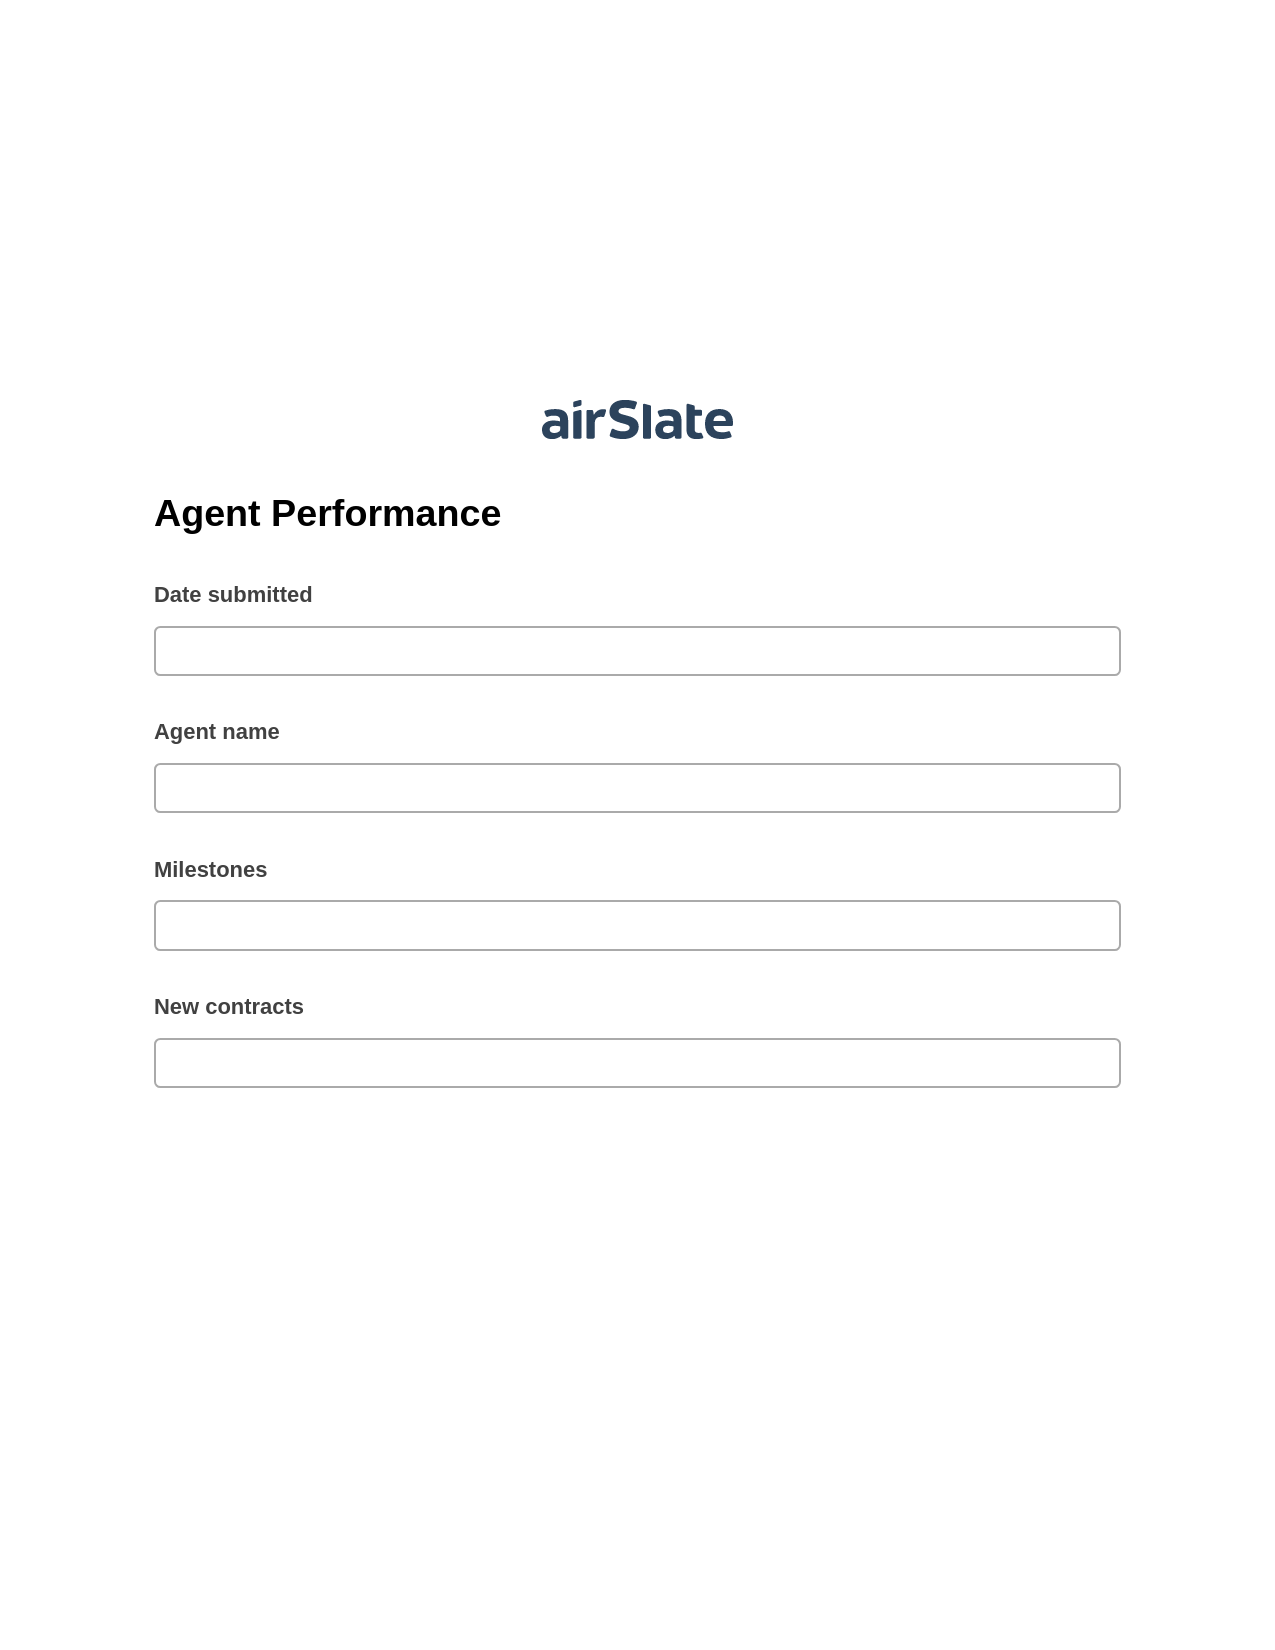 Agent Performance Pre-fill Dropdowns from Google Sheet Bot, Lock the Slate Bot, Archive to SharePoint Folder Bot